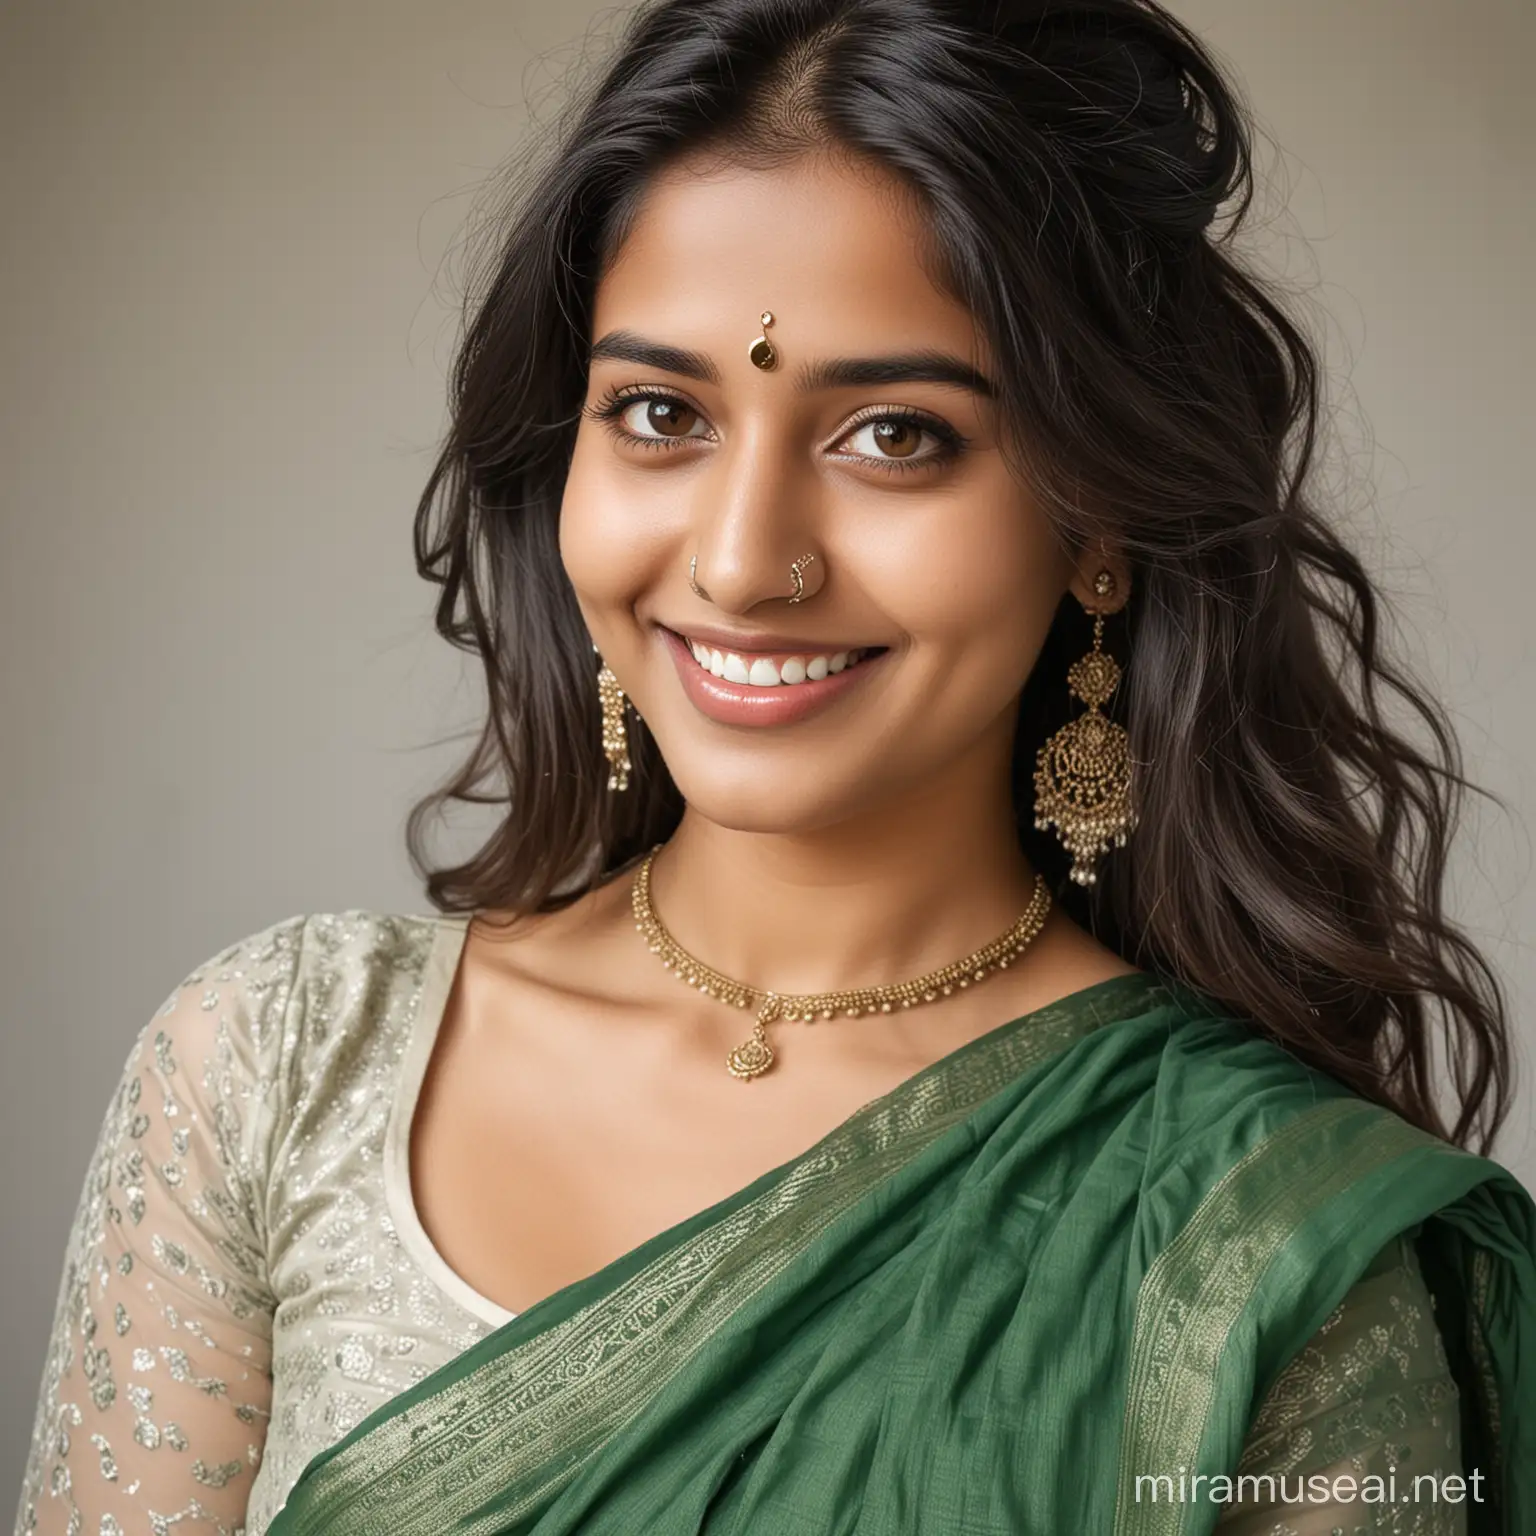 Smiling Indian Woman in Green Saree with Nose Ring